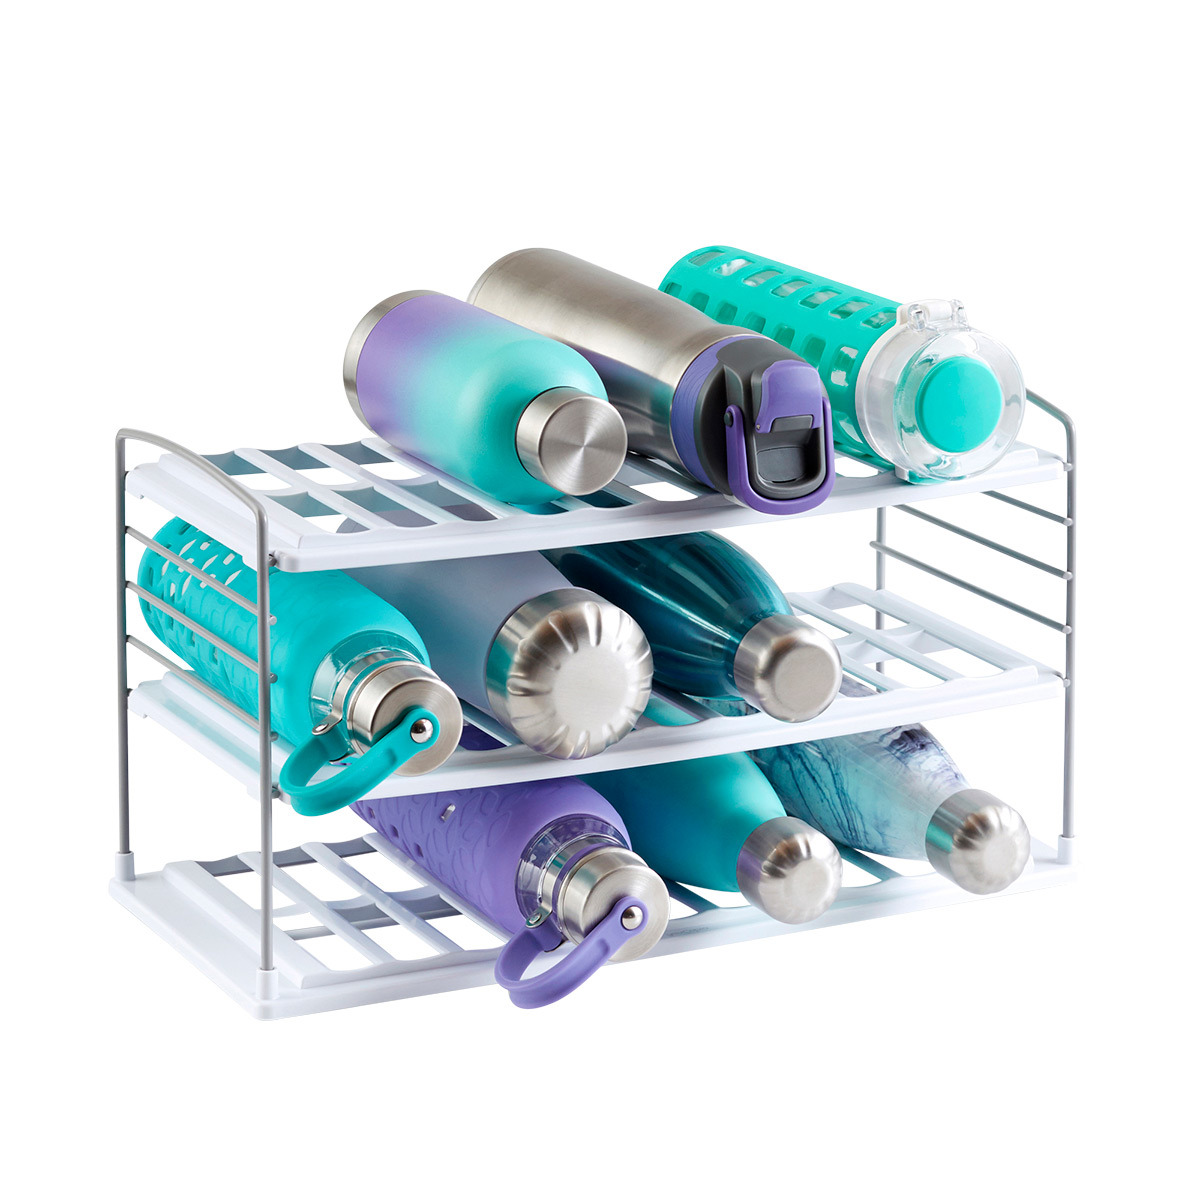 YouCopia UpSpace Bottle Organizer | The Container Store